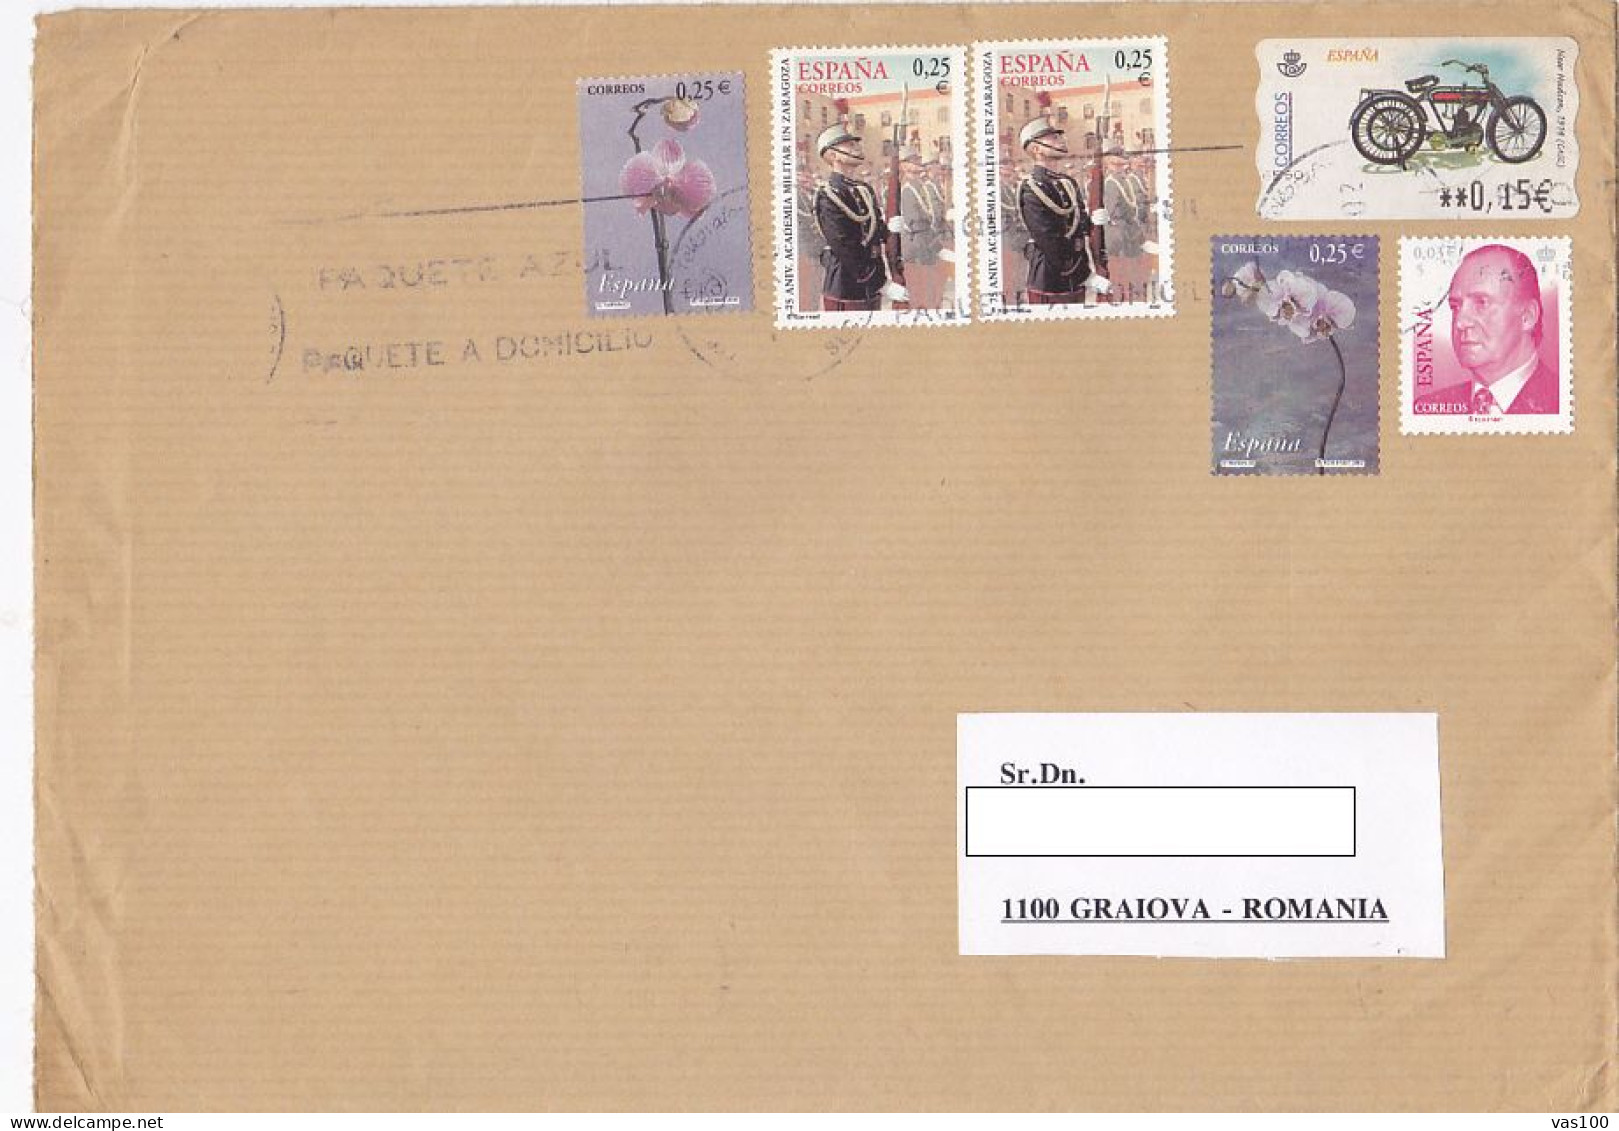 ORCHIDS, ZARAGOZA MILITARY ACADEMY, KING JUAN CARLOS, MOTORBIKE, STAMPS ON COVER, 2002, SPAIN - Storia Postale